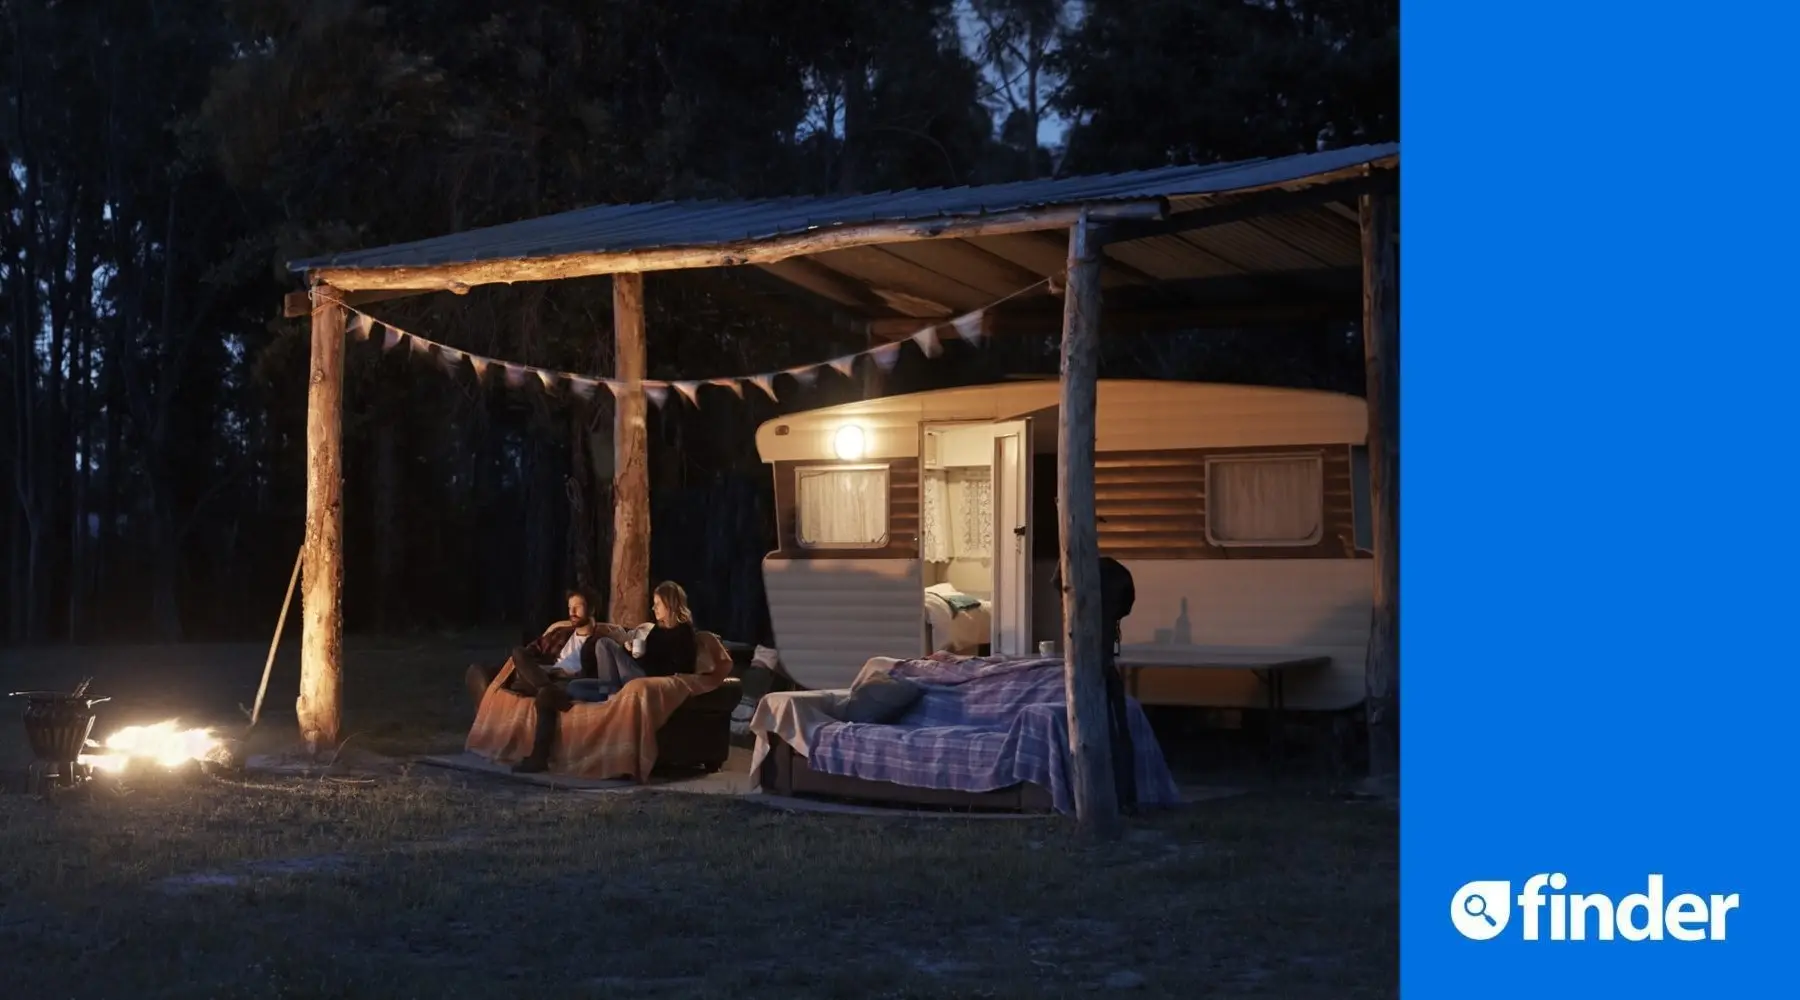 Couple_Glamping_At_Night_Getty_1800x1000